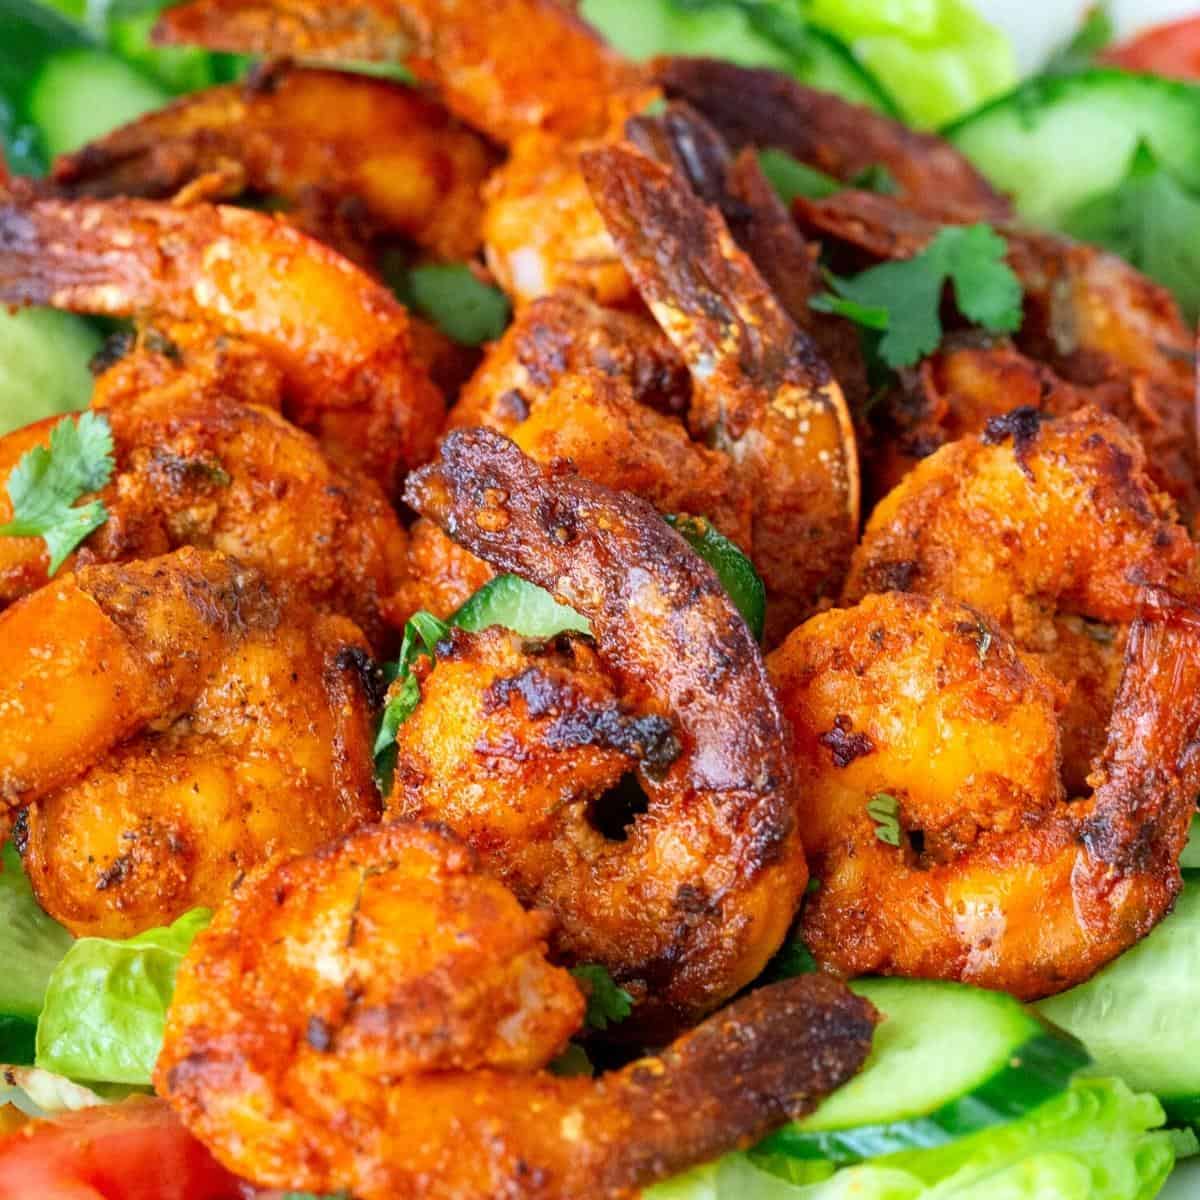 Grilled prawns on a plate of salad.